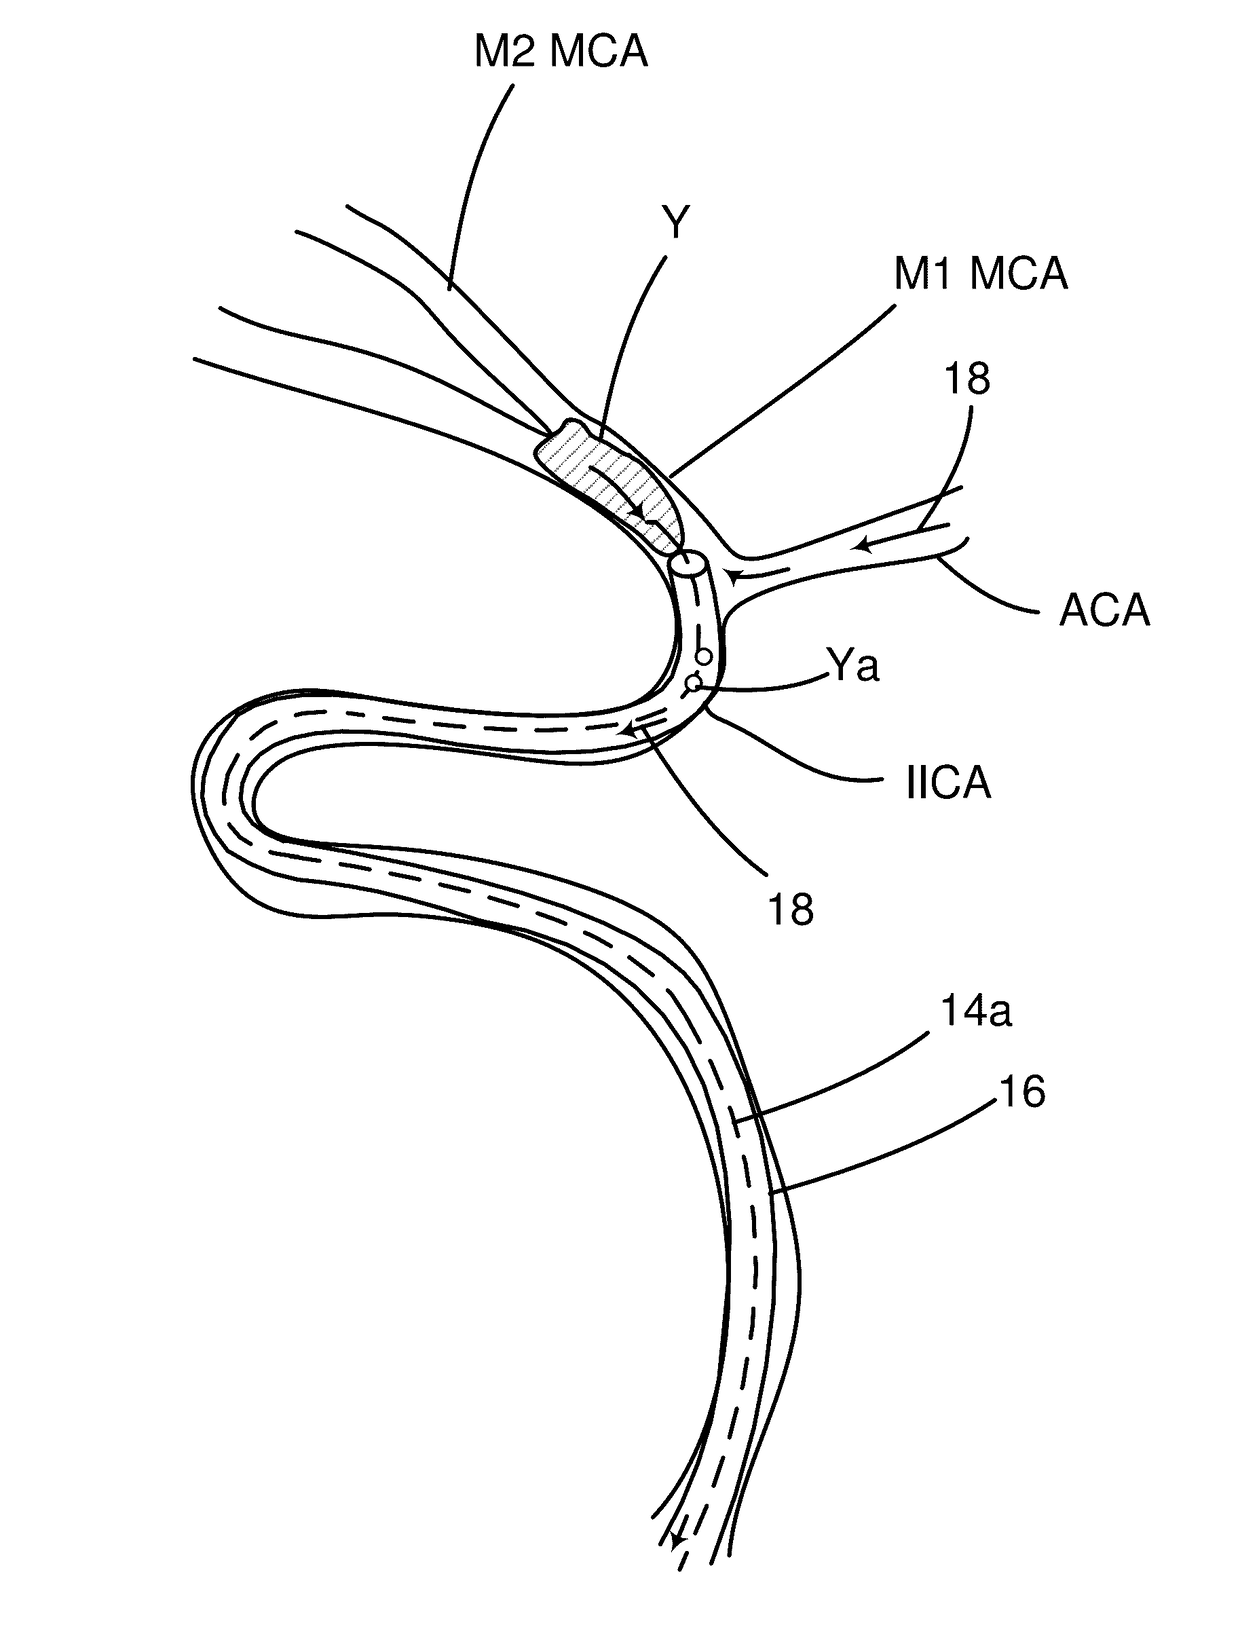 Systems and methods to improve perfusion pressure during endovascular intervention